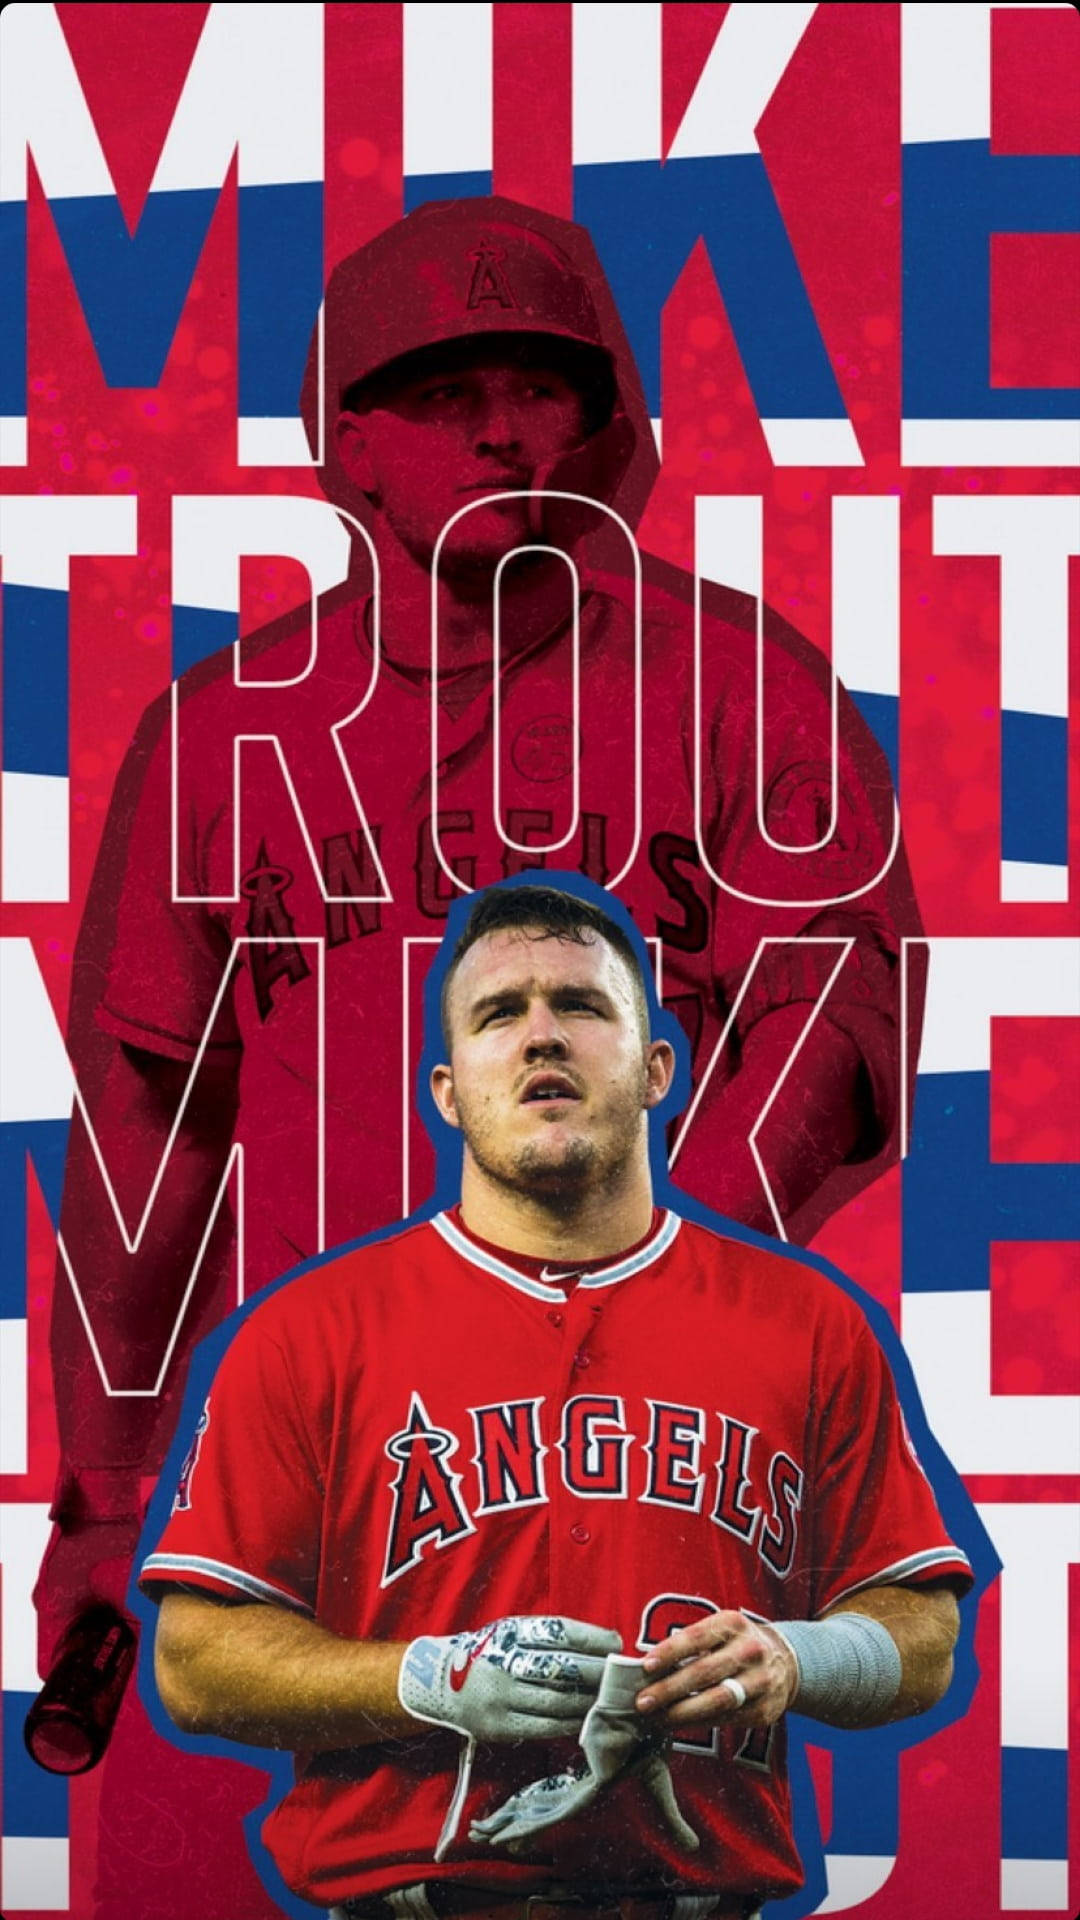 Mike Trout Number 27 Wallpaper